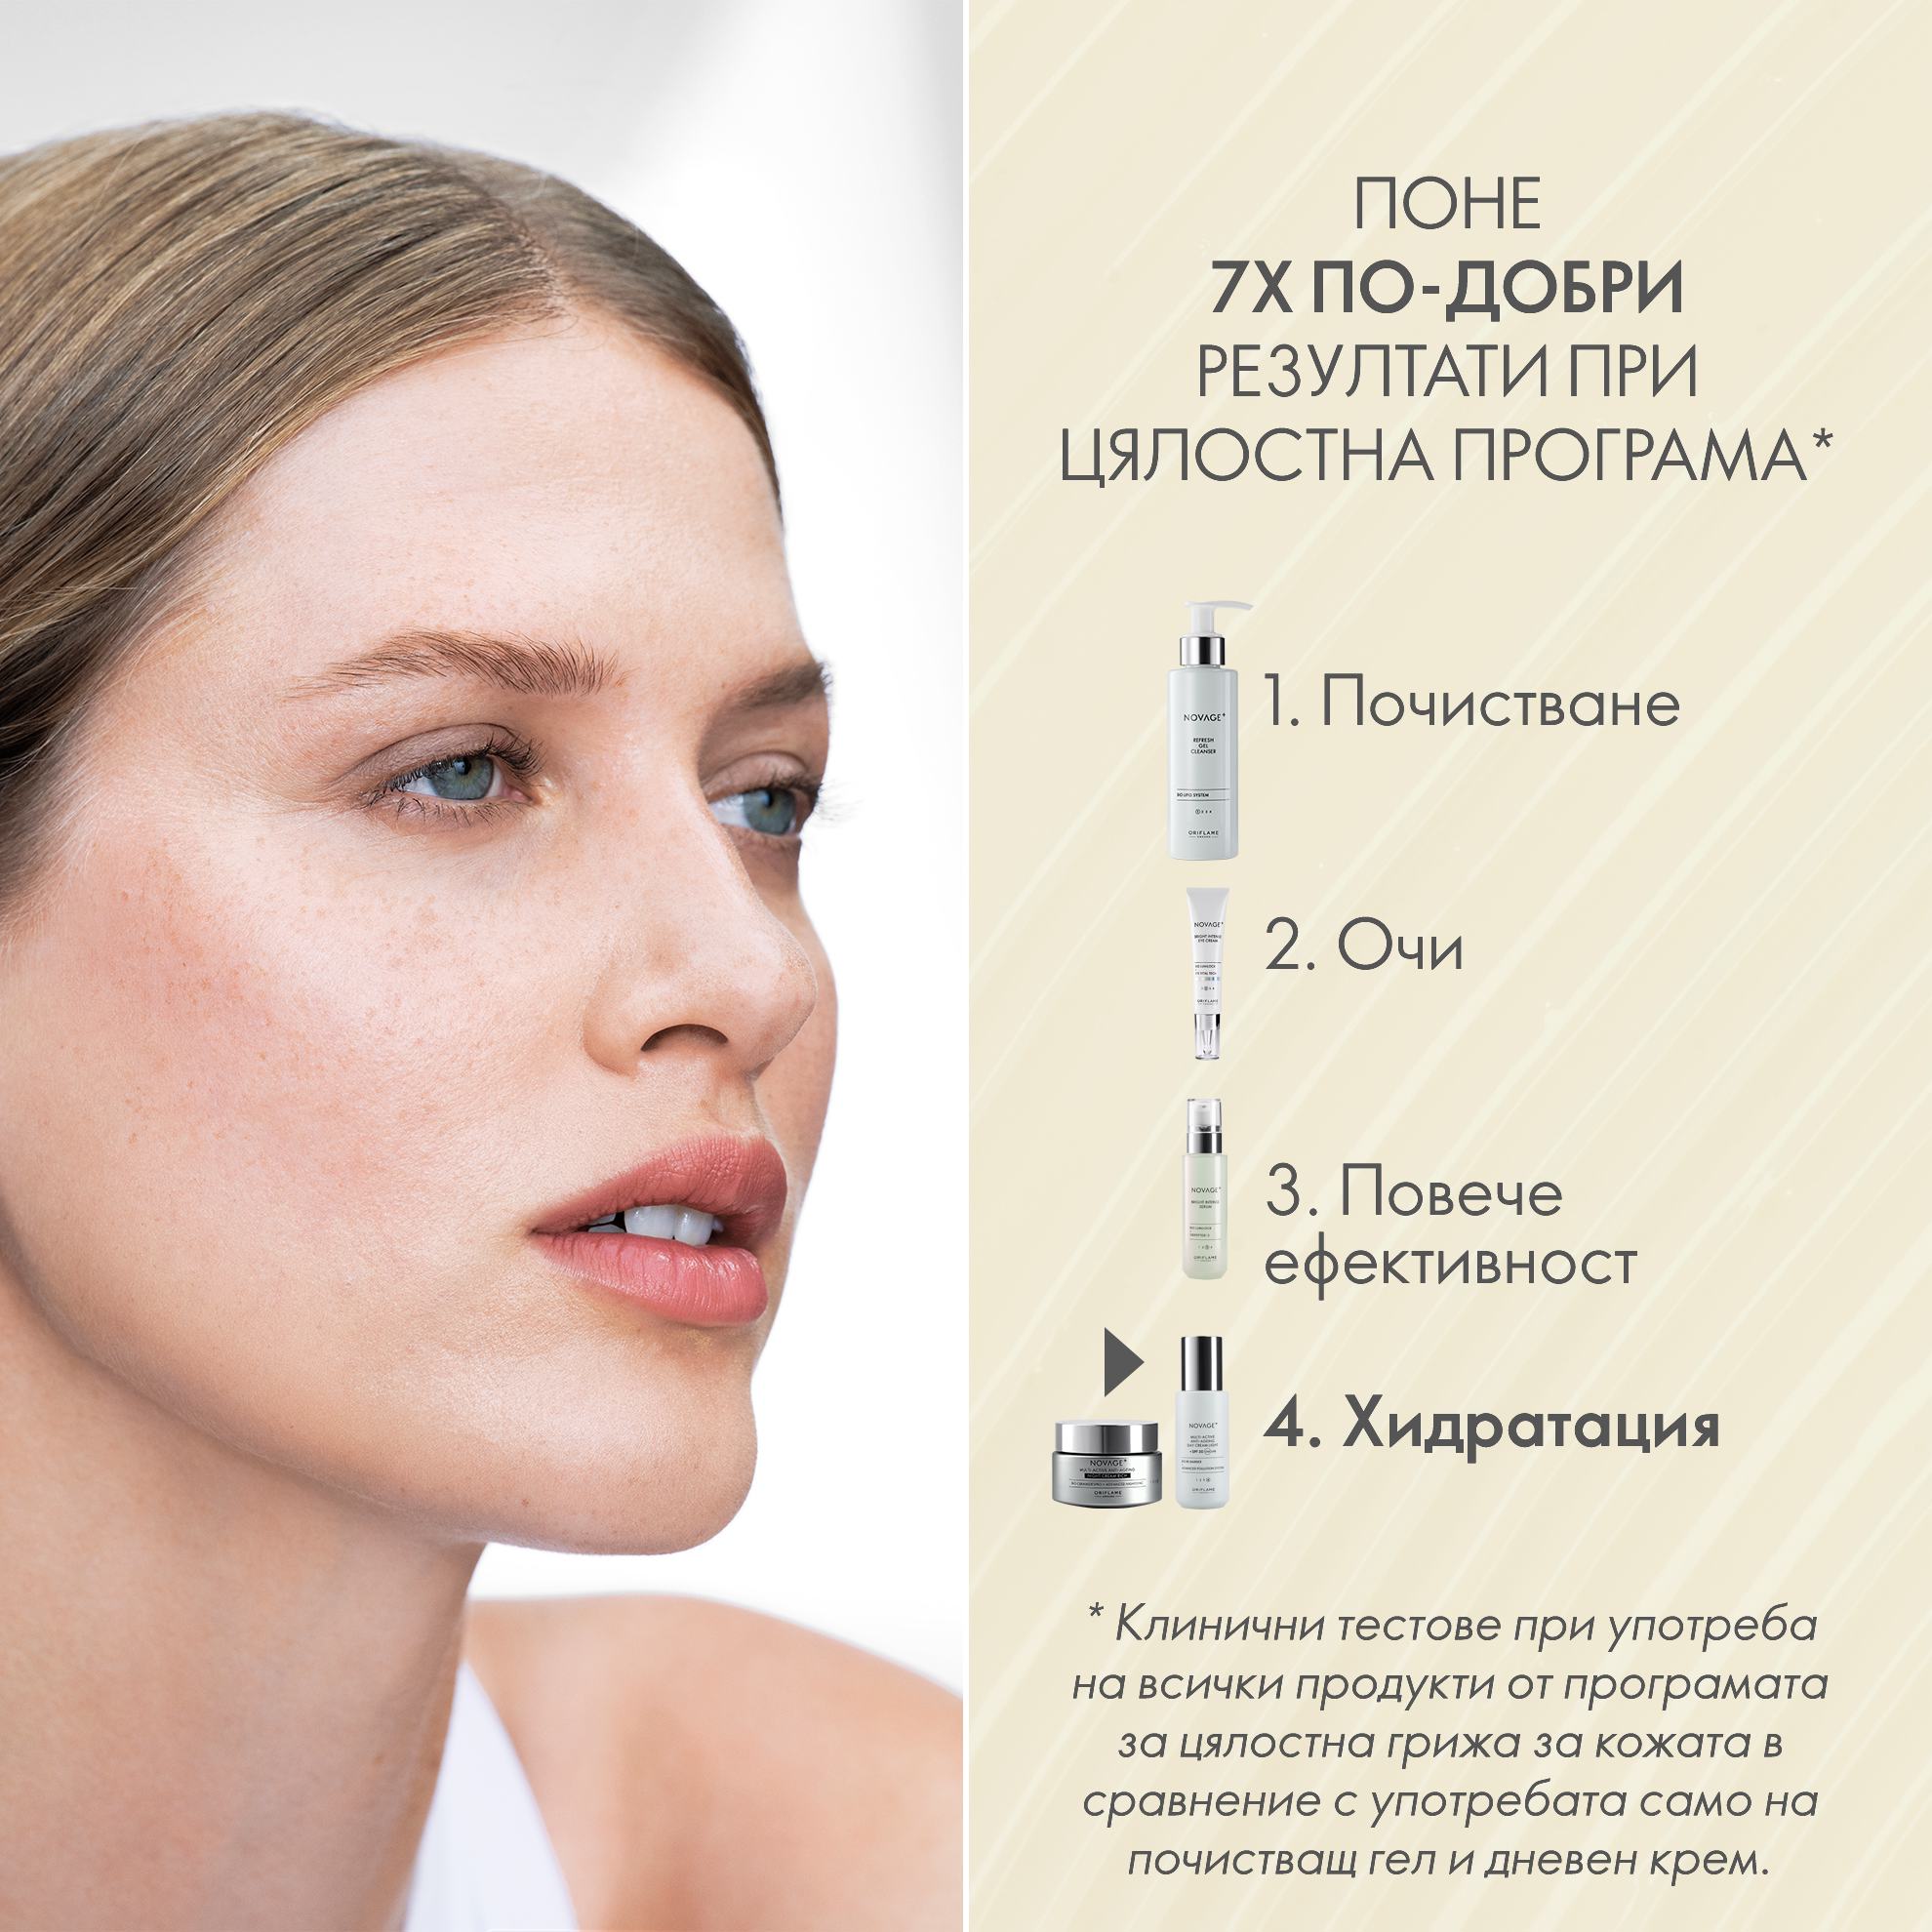 https://media-cdn.oriflame.com/productImage?externalMediaId=product-management-media%2fProducts%2f41044%2fBG%2f41044_5.png&id=17554979&version=1